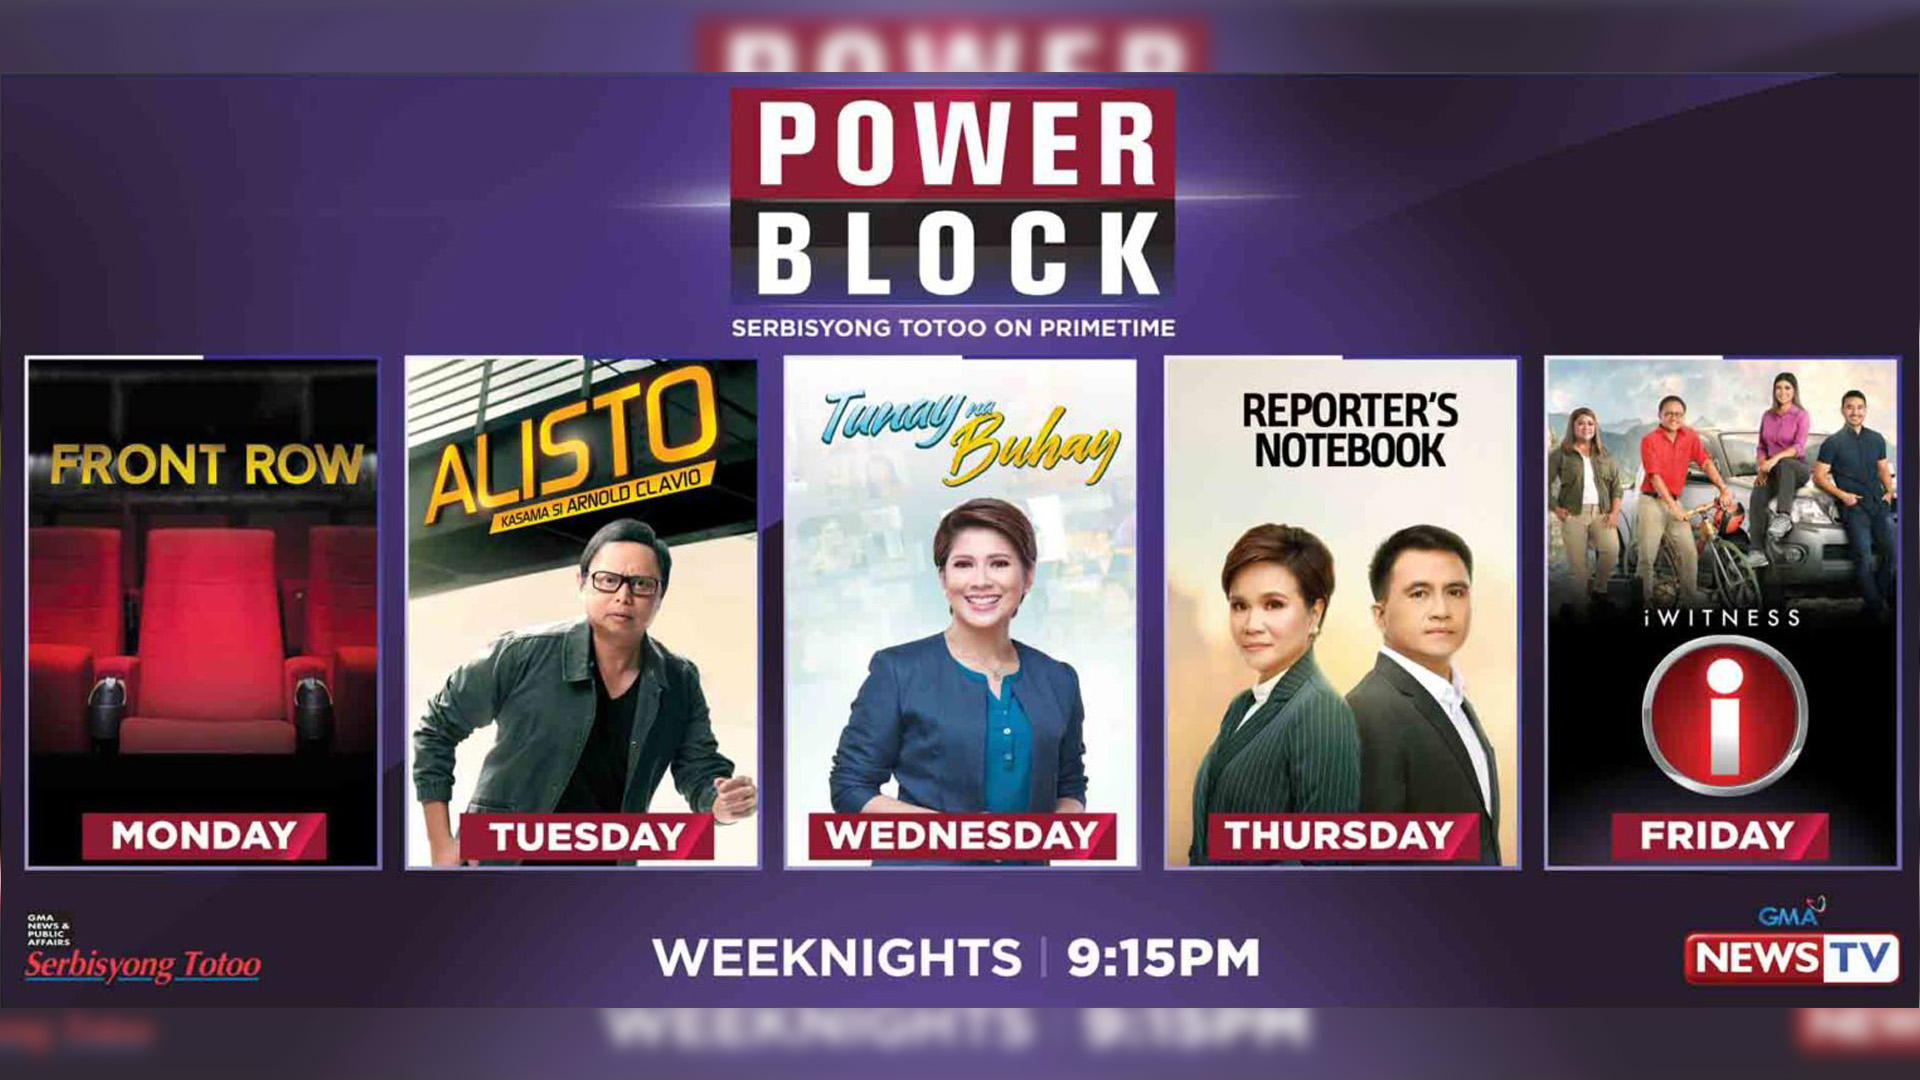 GMA’s AwardWinning Public Affairs Shows Move To Primetime PAGEONE